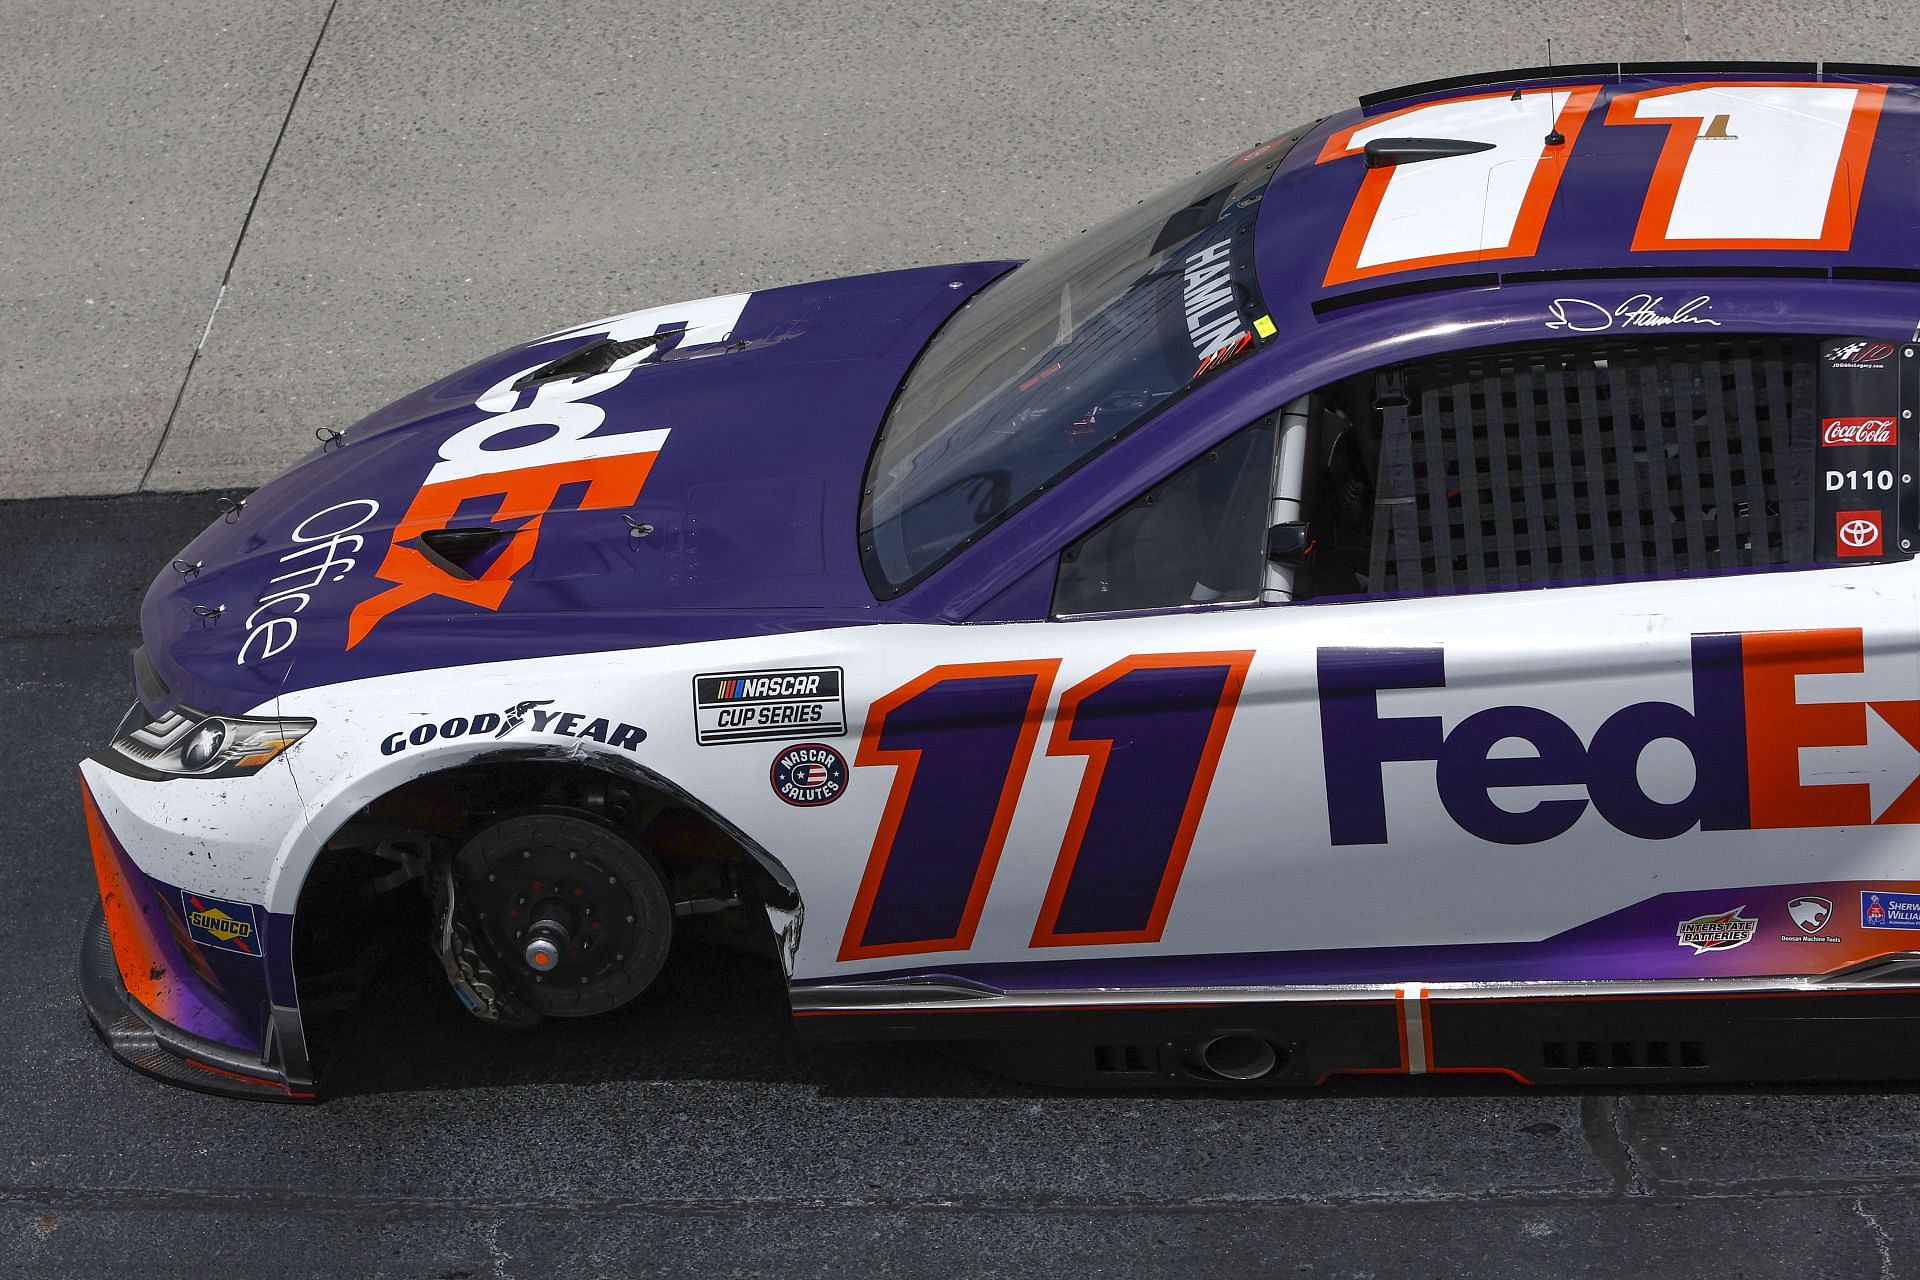 Denny Hamlin drives without the left front tire after a pit stop during the 2022 NASCAR Cup Series DuraMAX Drydene 400 presented by RelaDyne at Dover Motor Speedway in Dover, Delaware. (Photo by Sean Gardner/Getty Images)